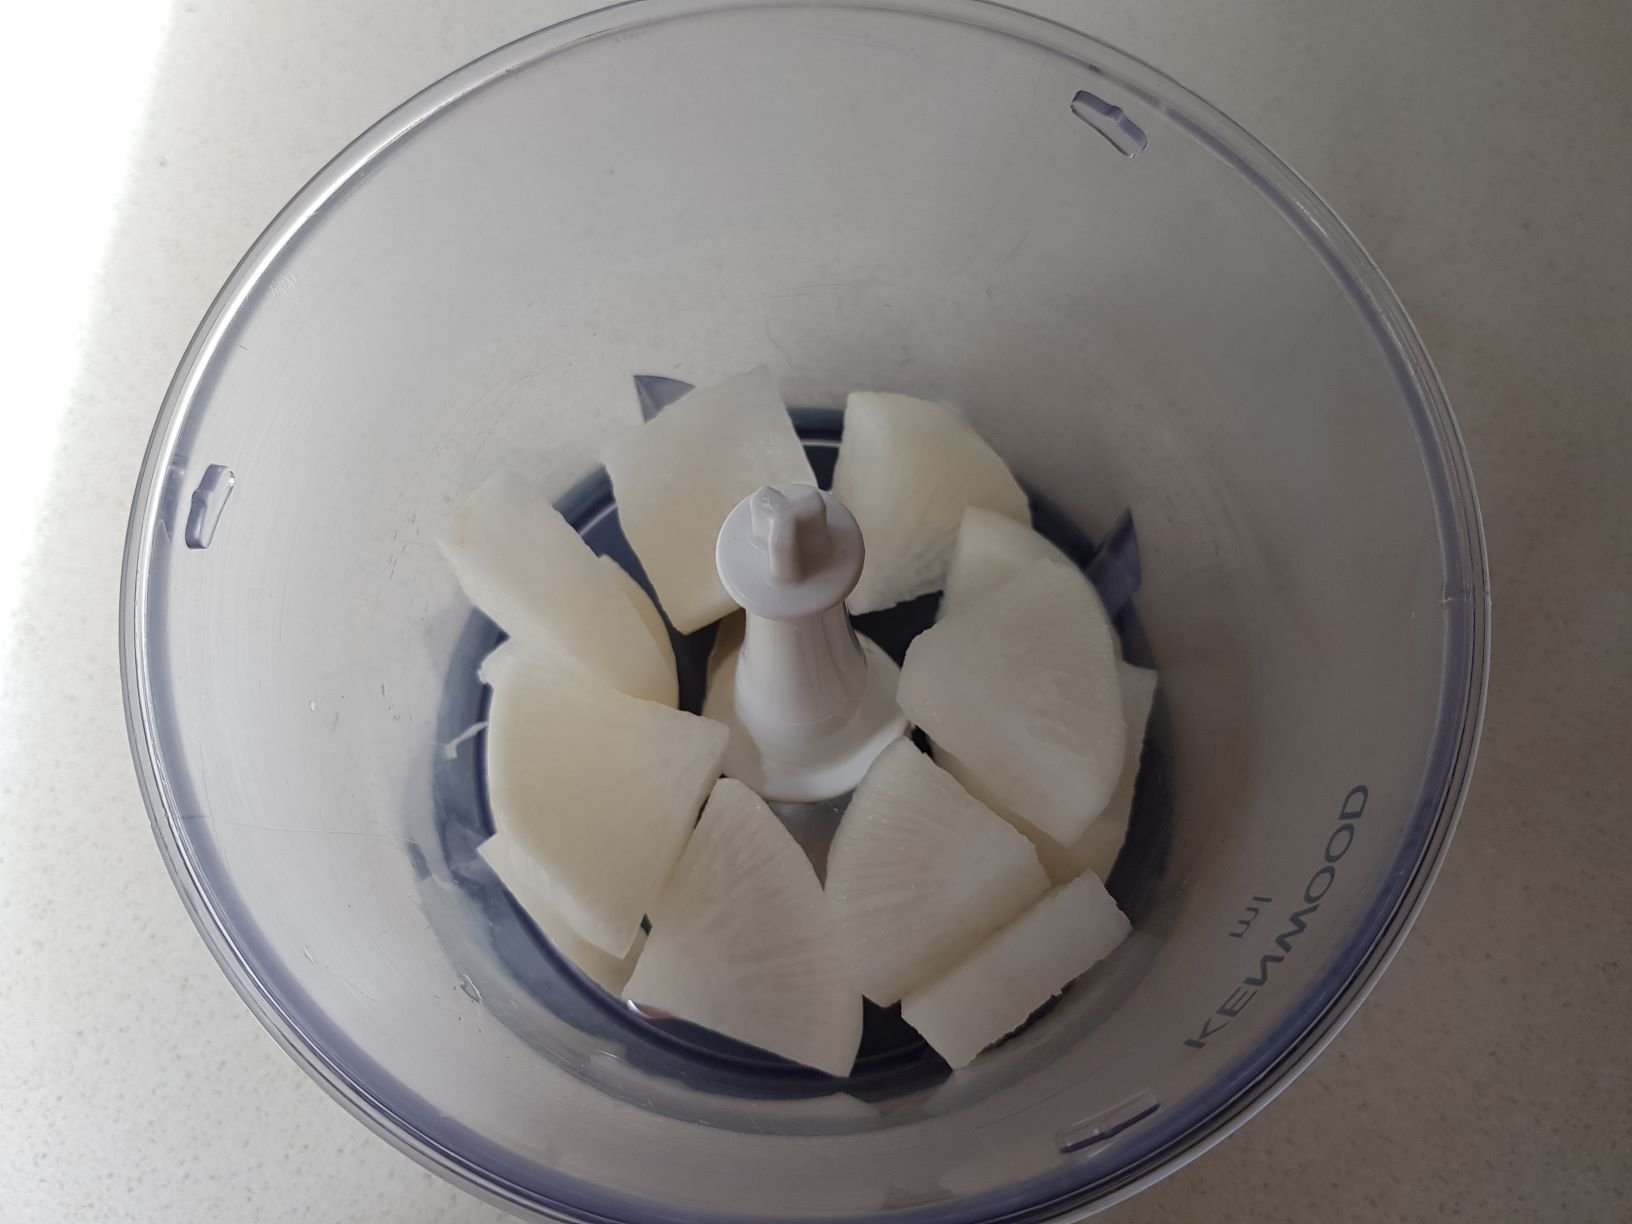 Journey to the East, Japanese home cooking recipe, Pieces of daikon white radish in food processor